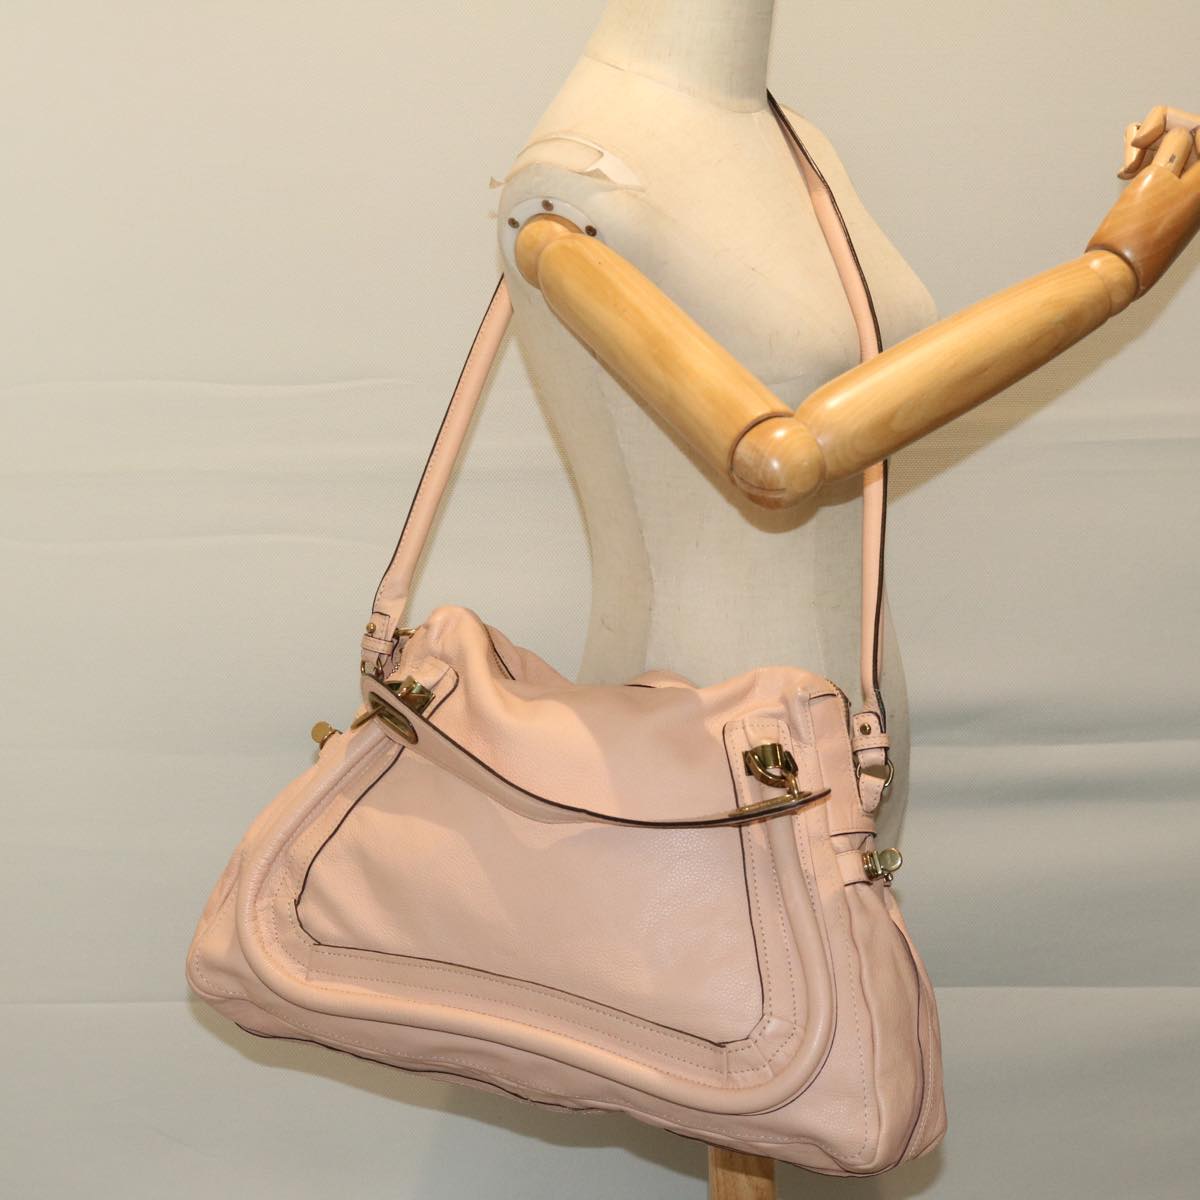 Chloe Paraty Hand Bag Leather 2way Pink Auth bs12541